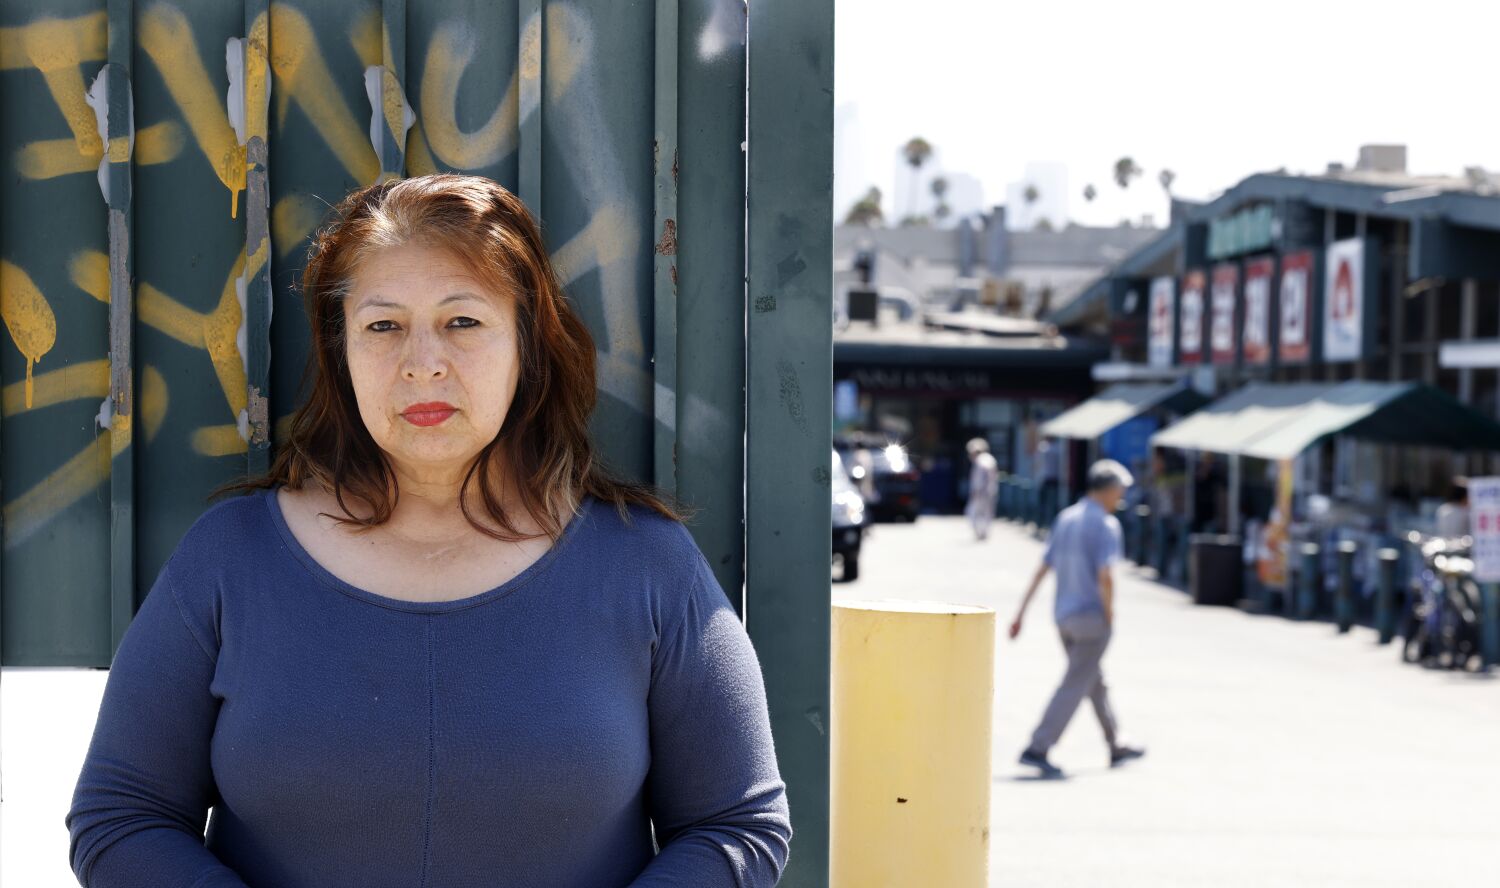 Koreatown workers are fighting for unions. Why do essential workers still lack basic protections?